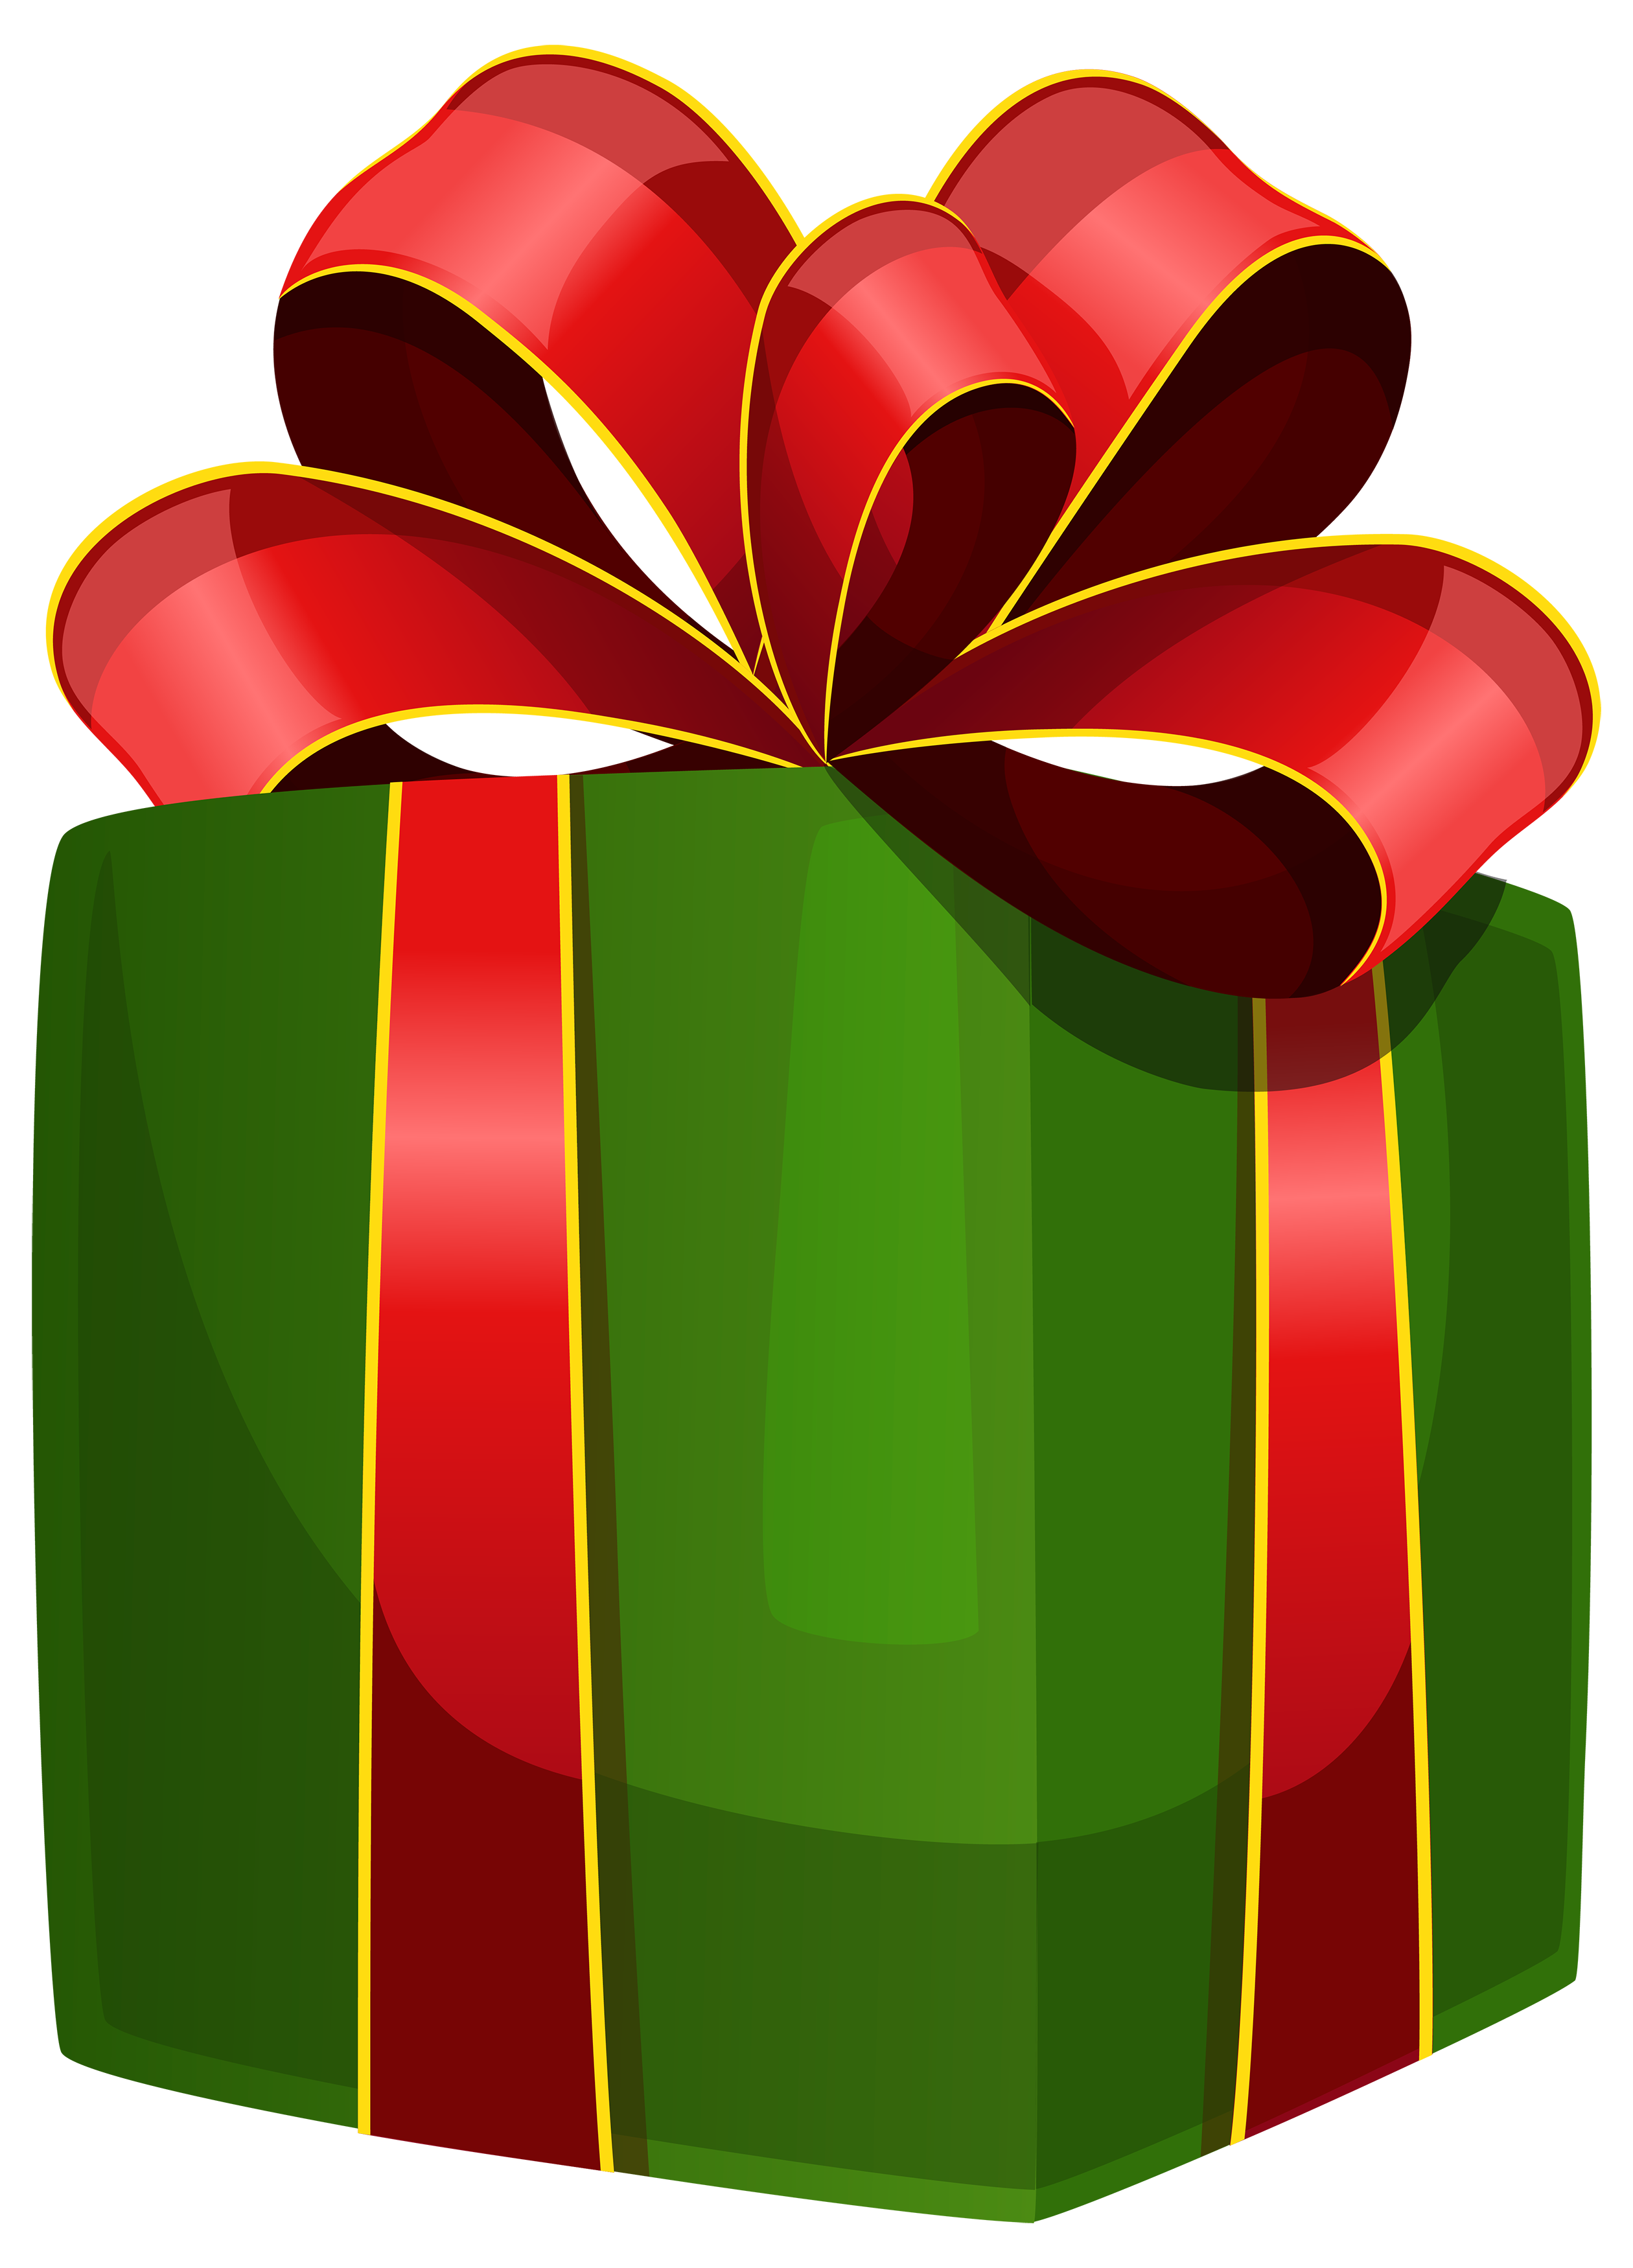 Green Gift Box PNG Clipart - Best WEB Clipart